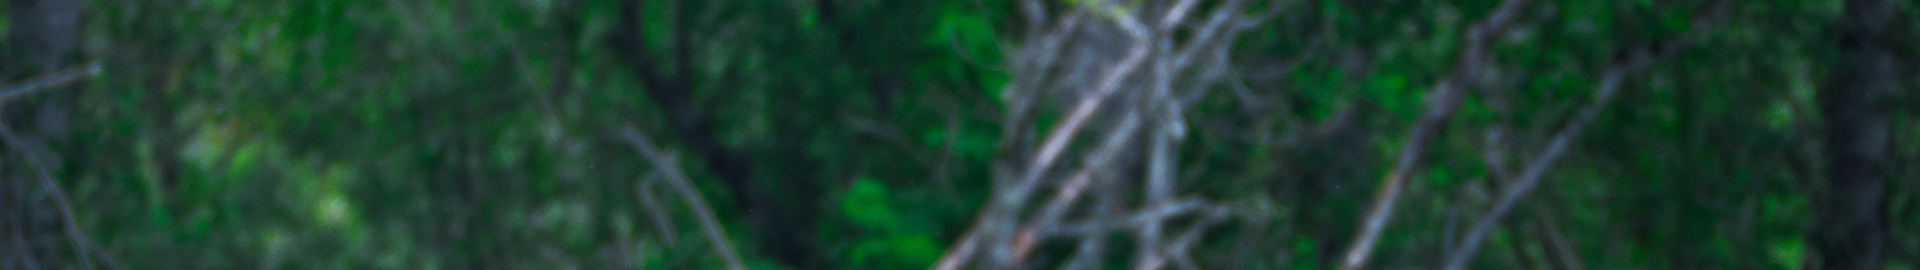 Blurry Woods Background Image